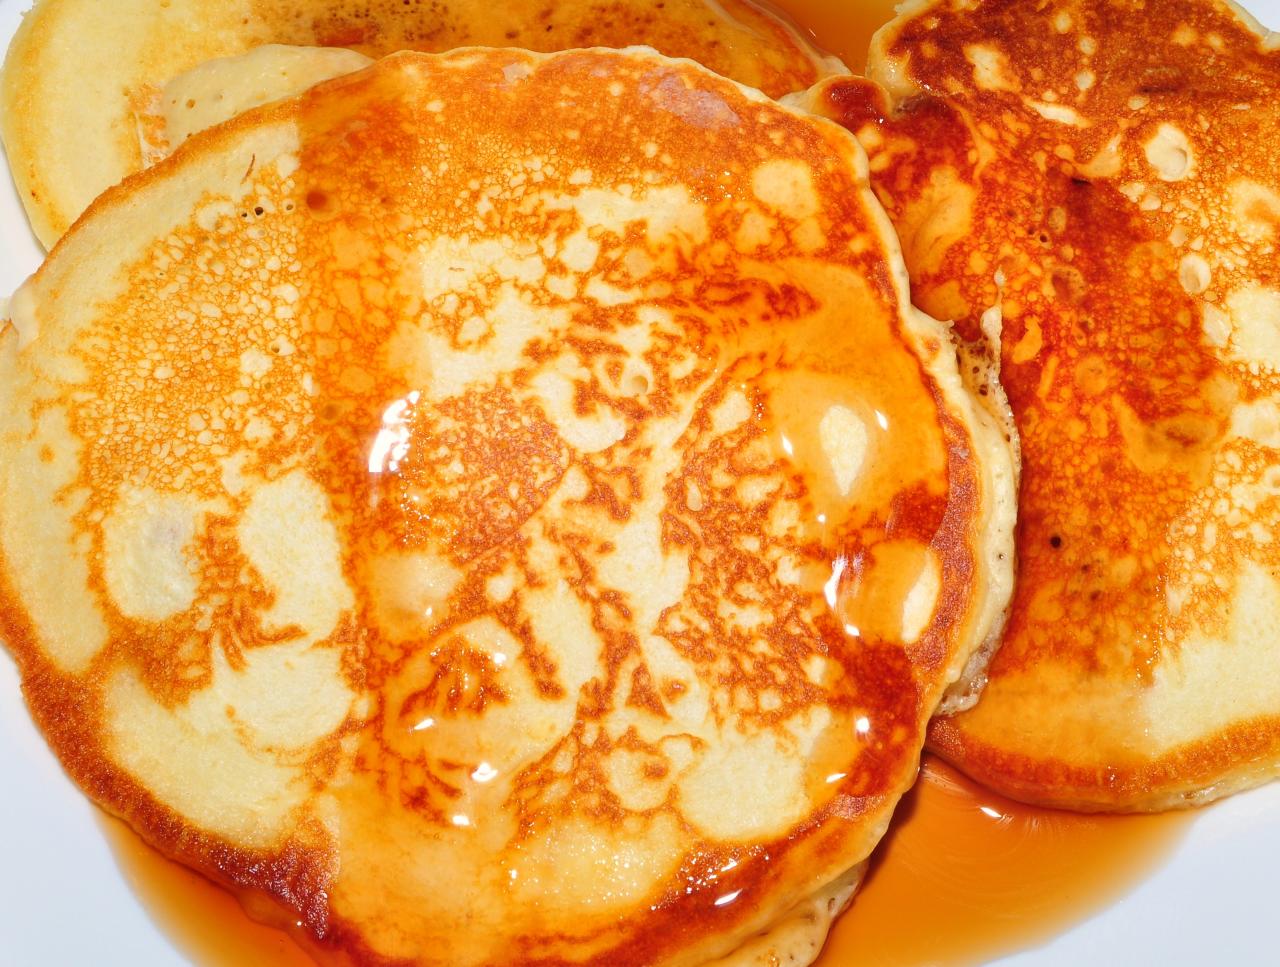 pancakes are topped with syrup on a white plate